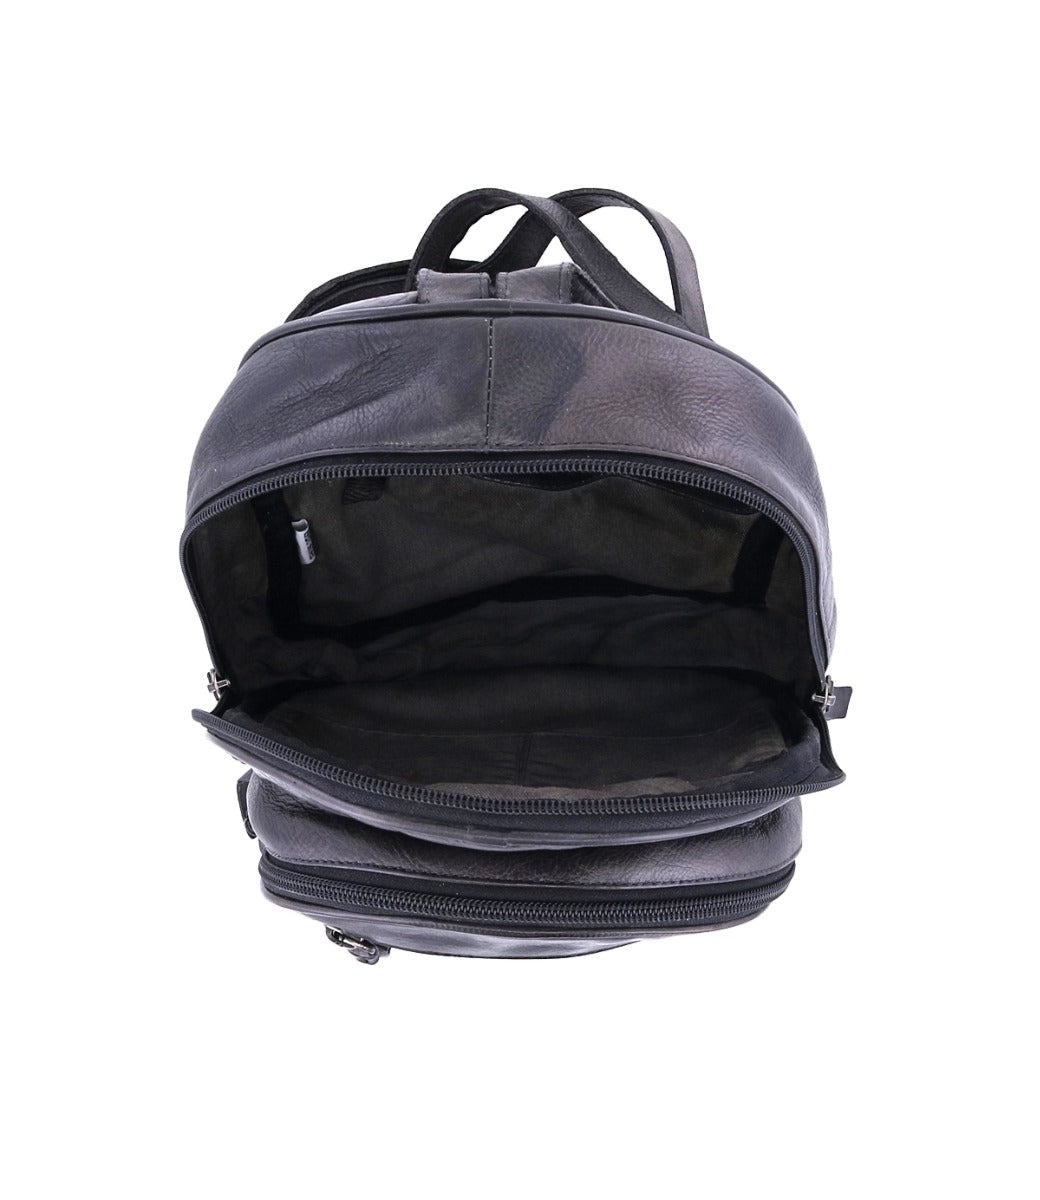 A Bed Stu Dominique black leather backpack on a white background.